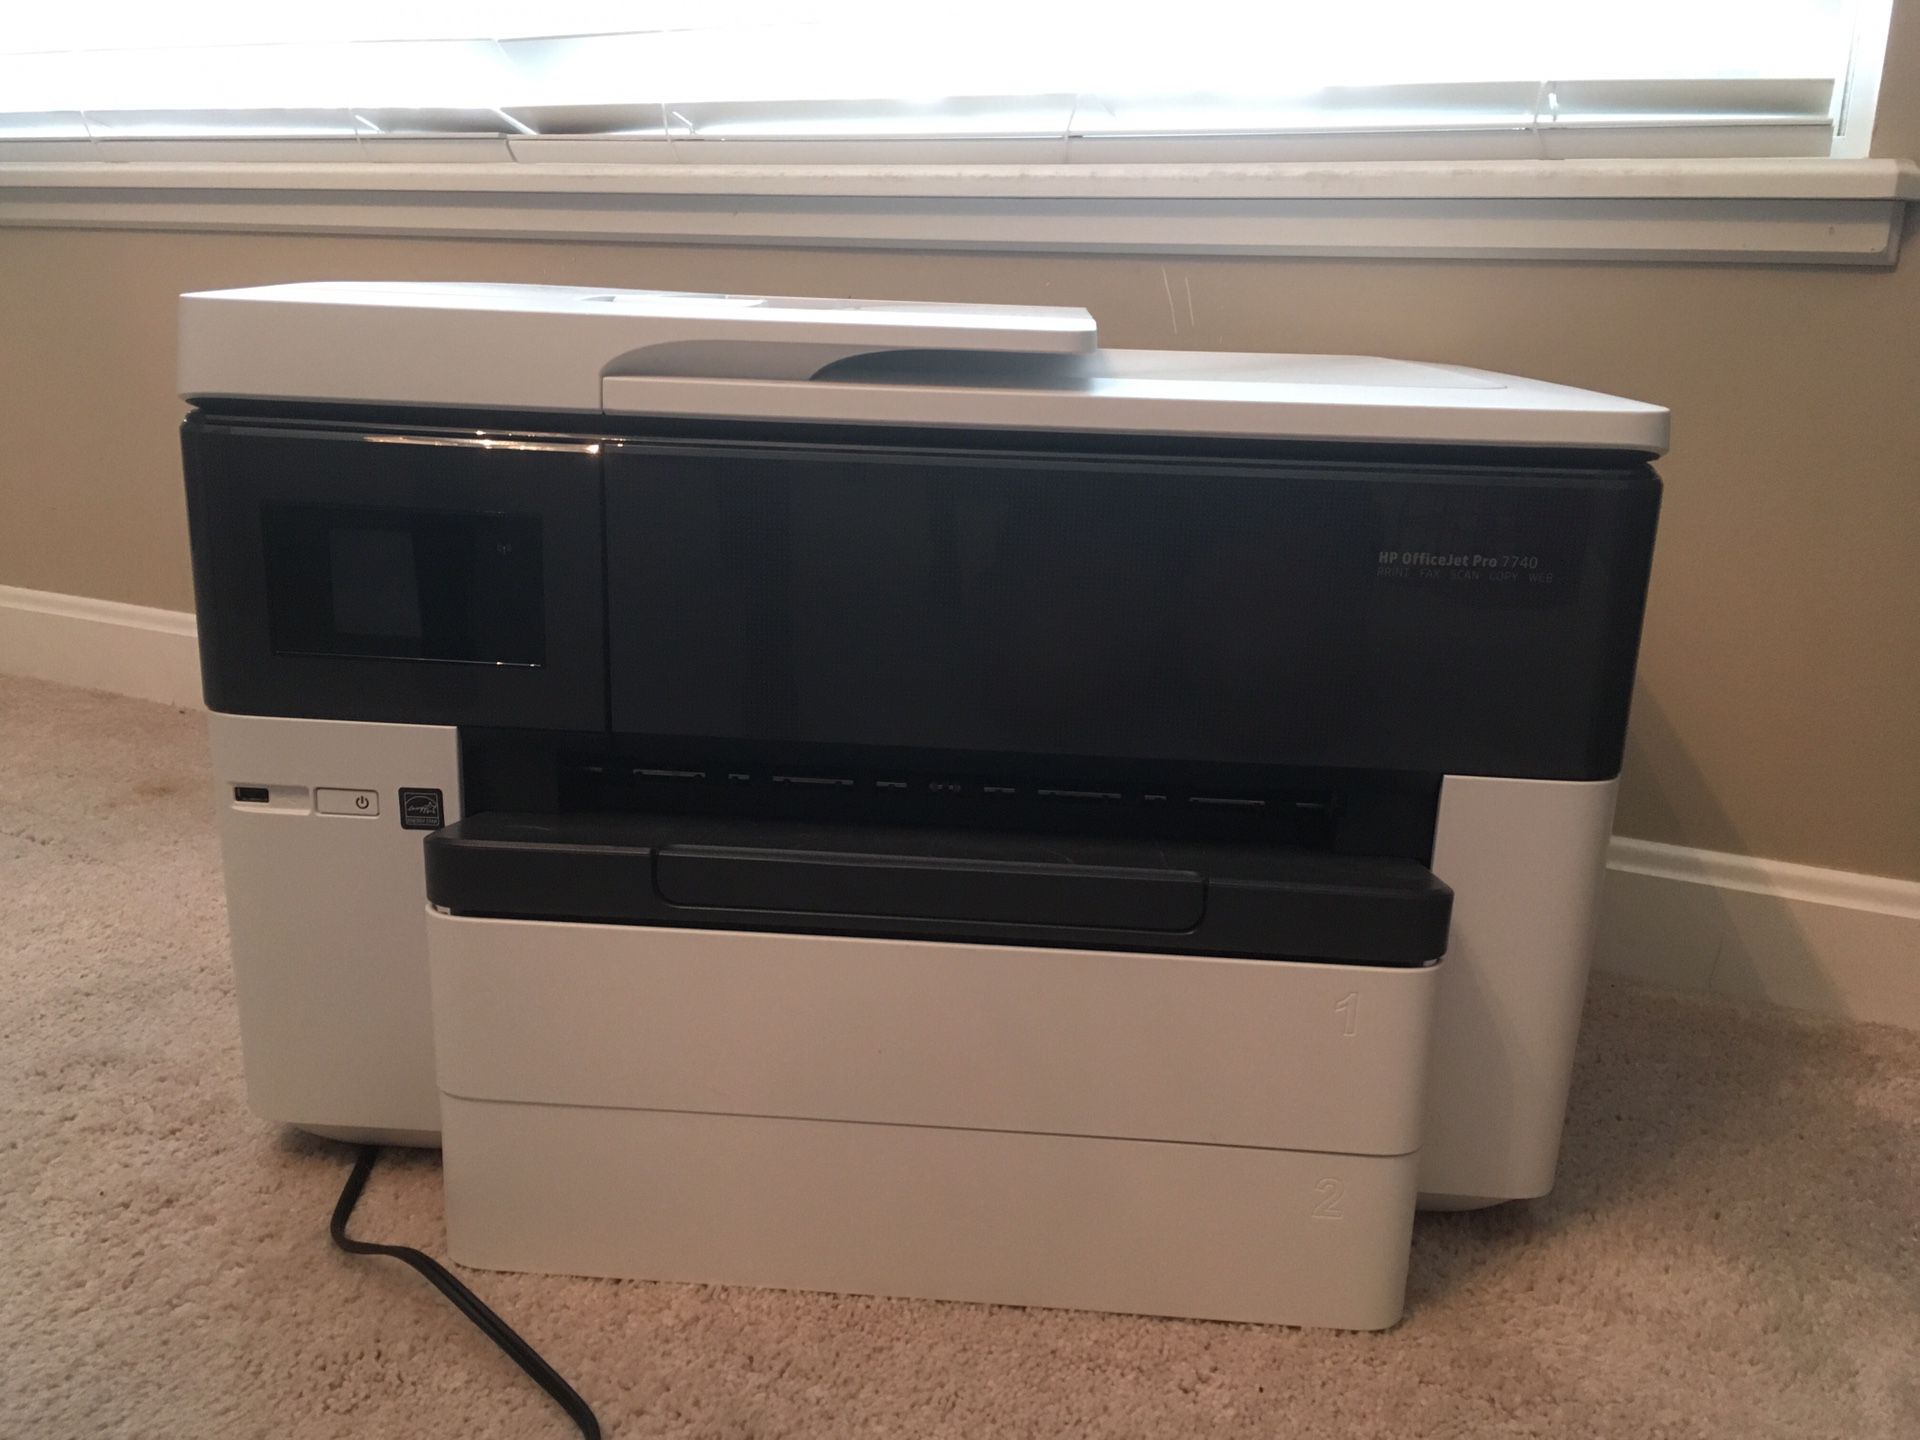 HP printer with cartridges